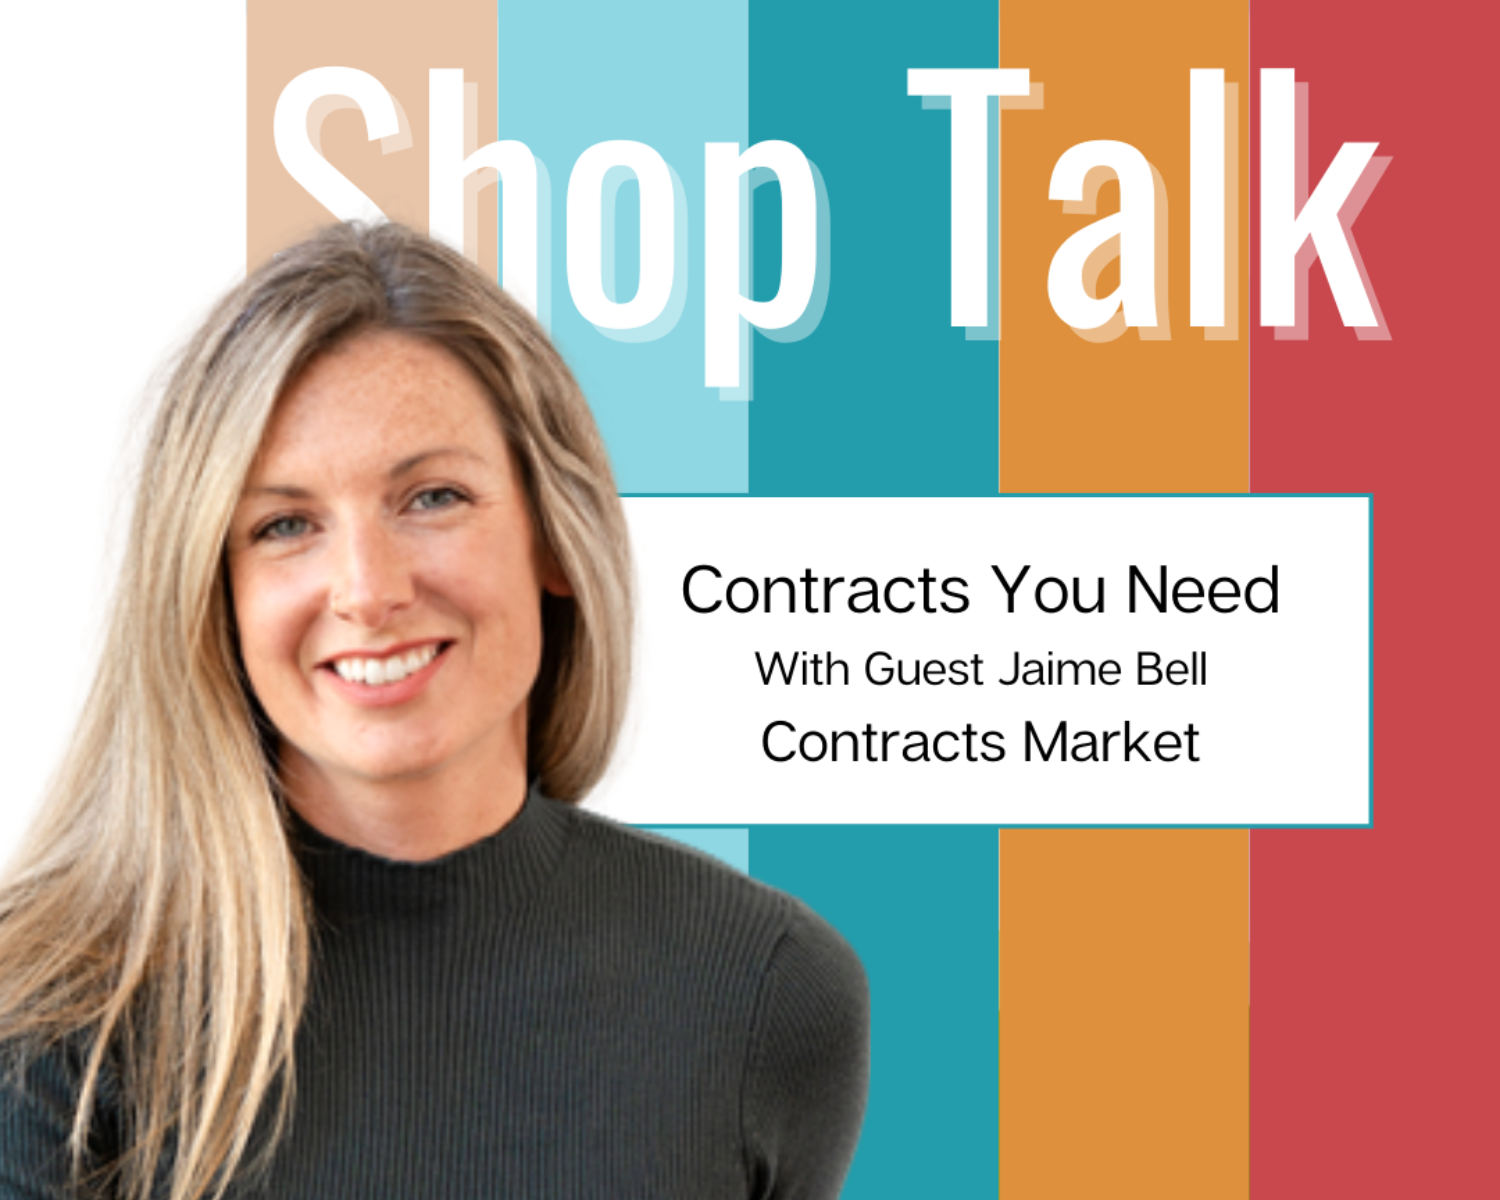 Contracts You Need - Shop Talk Episode